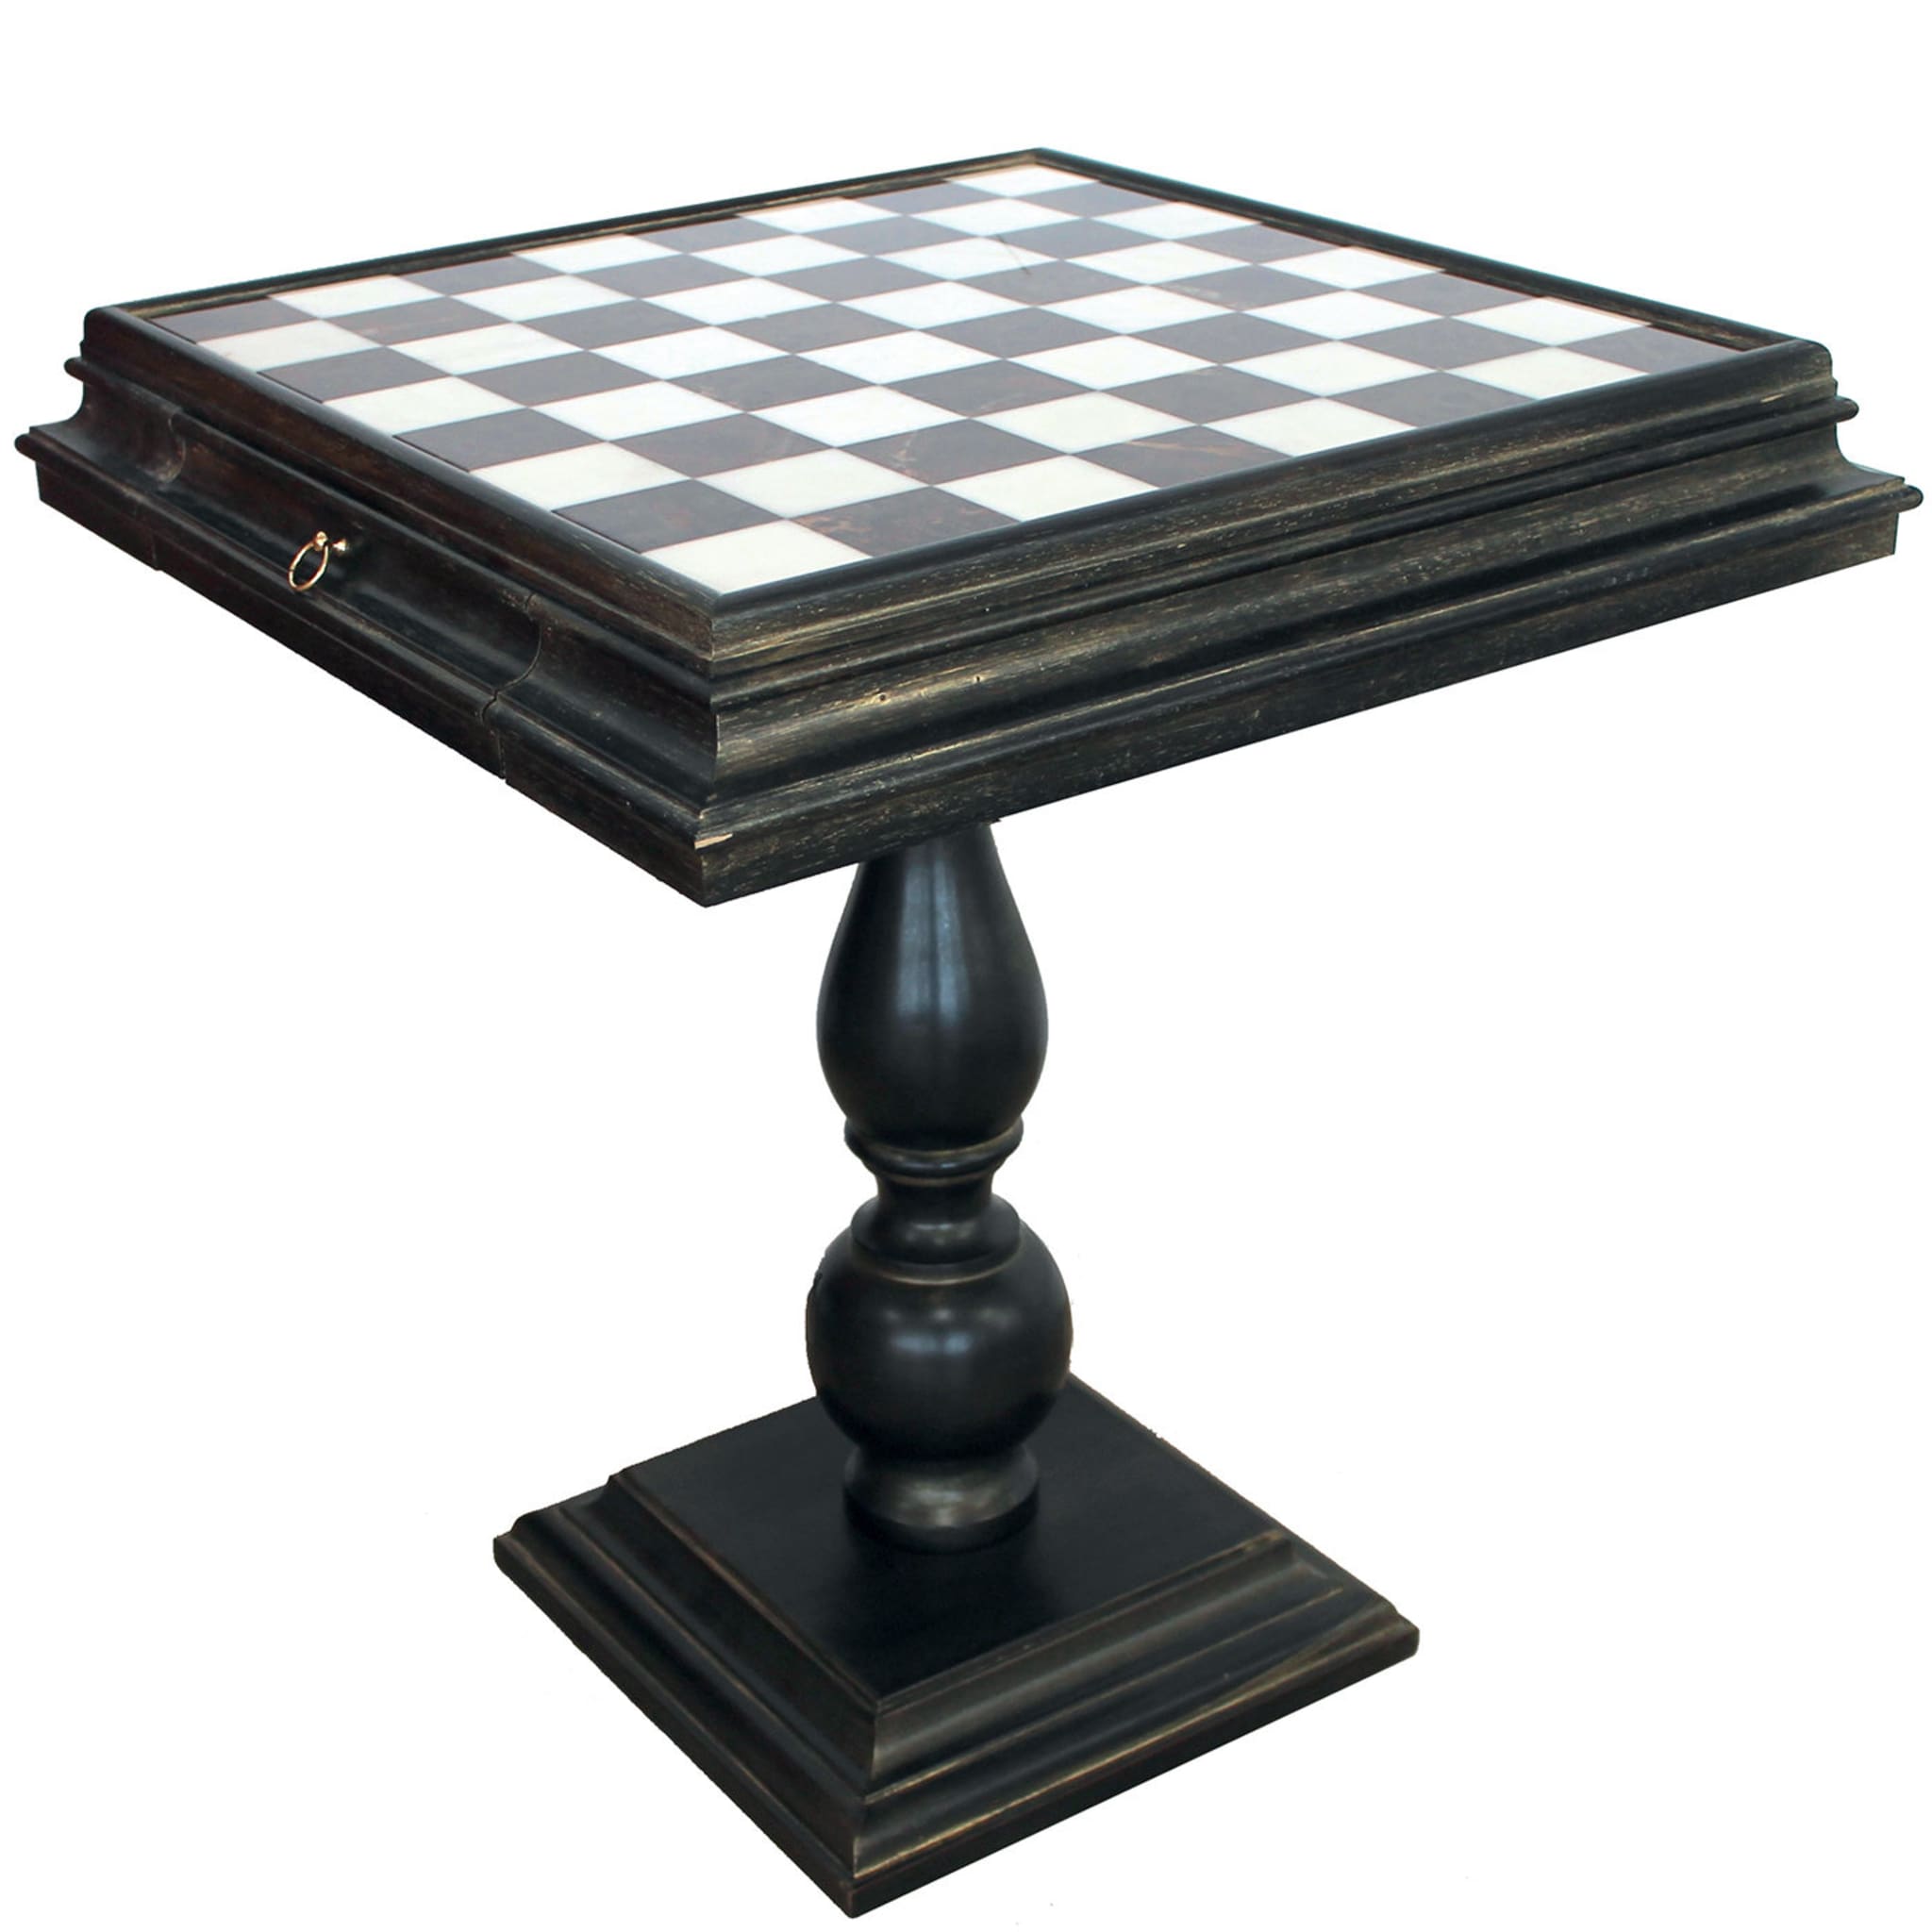 Style Chess Table with 32 chess pieces  - Alternative view 2